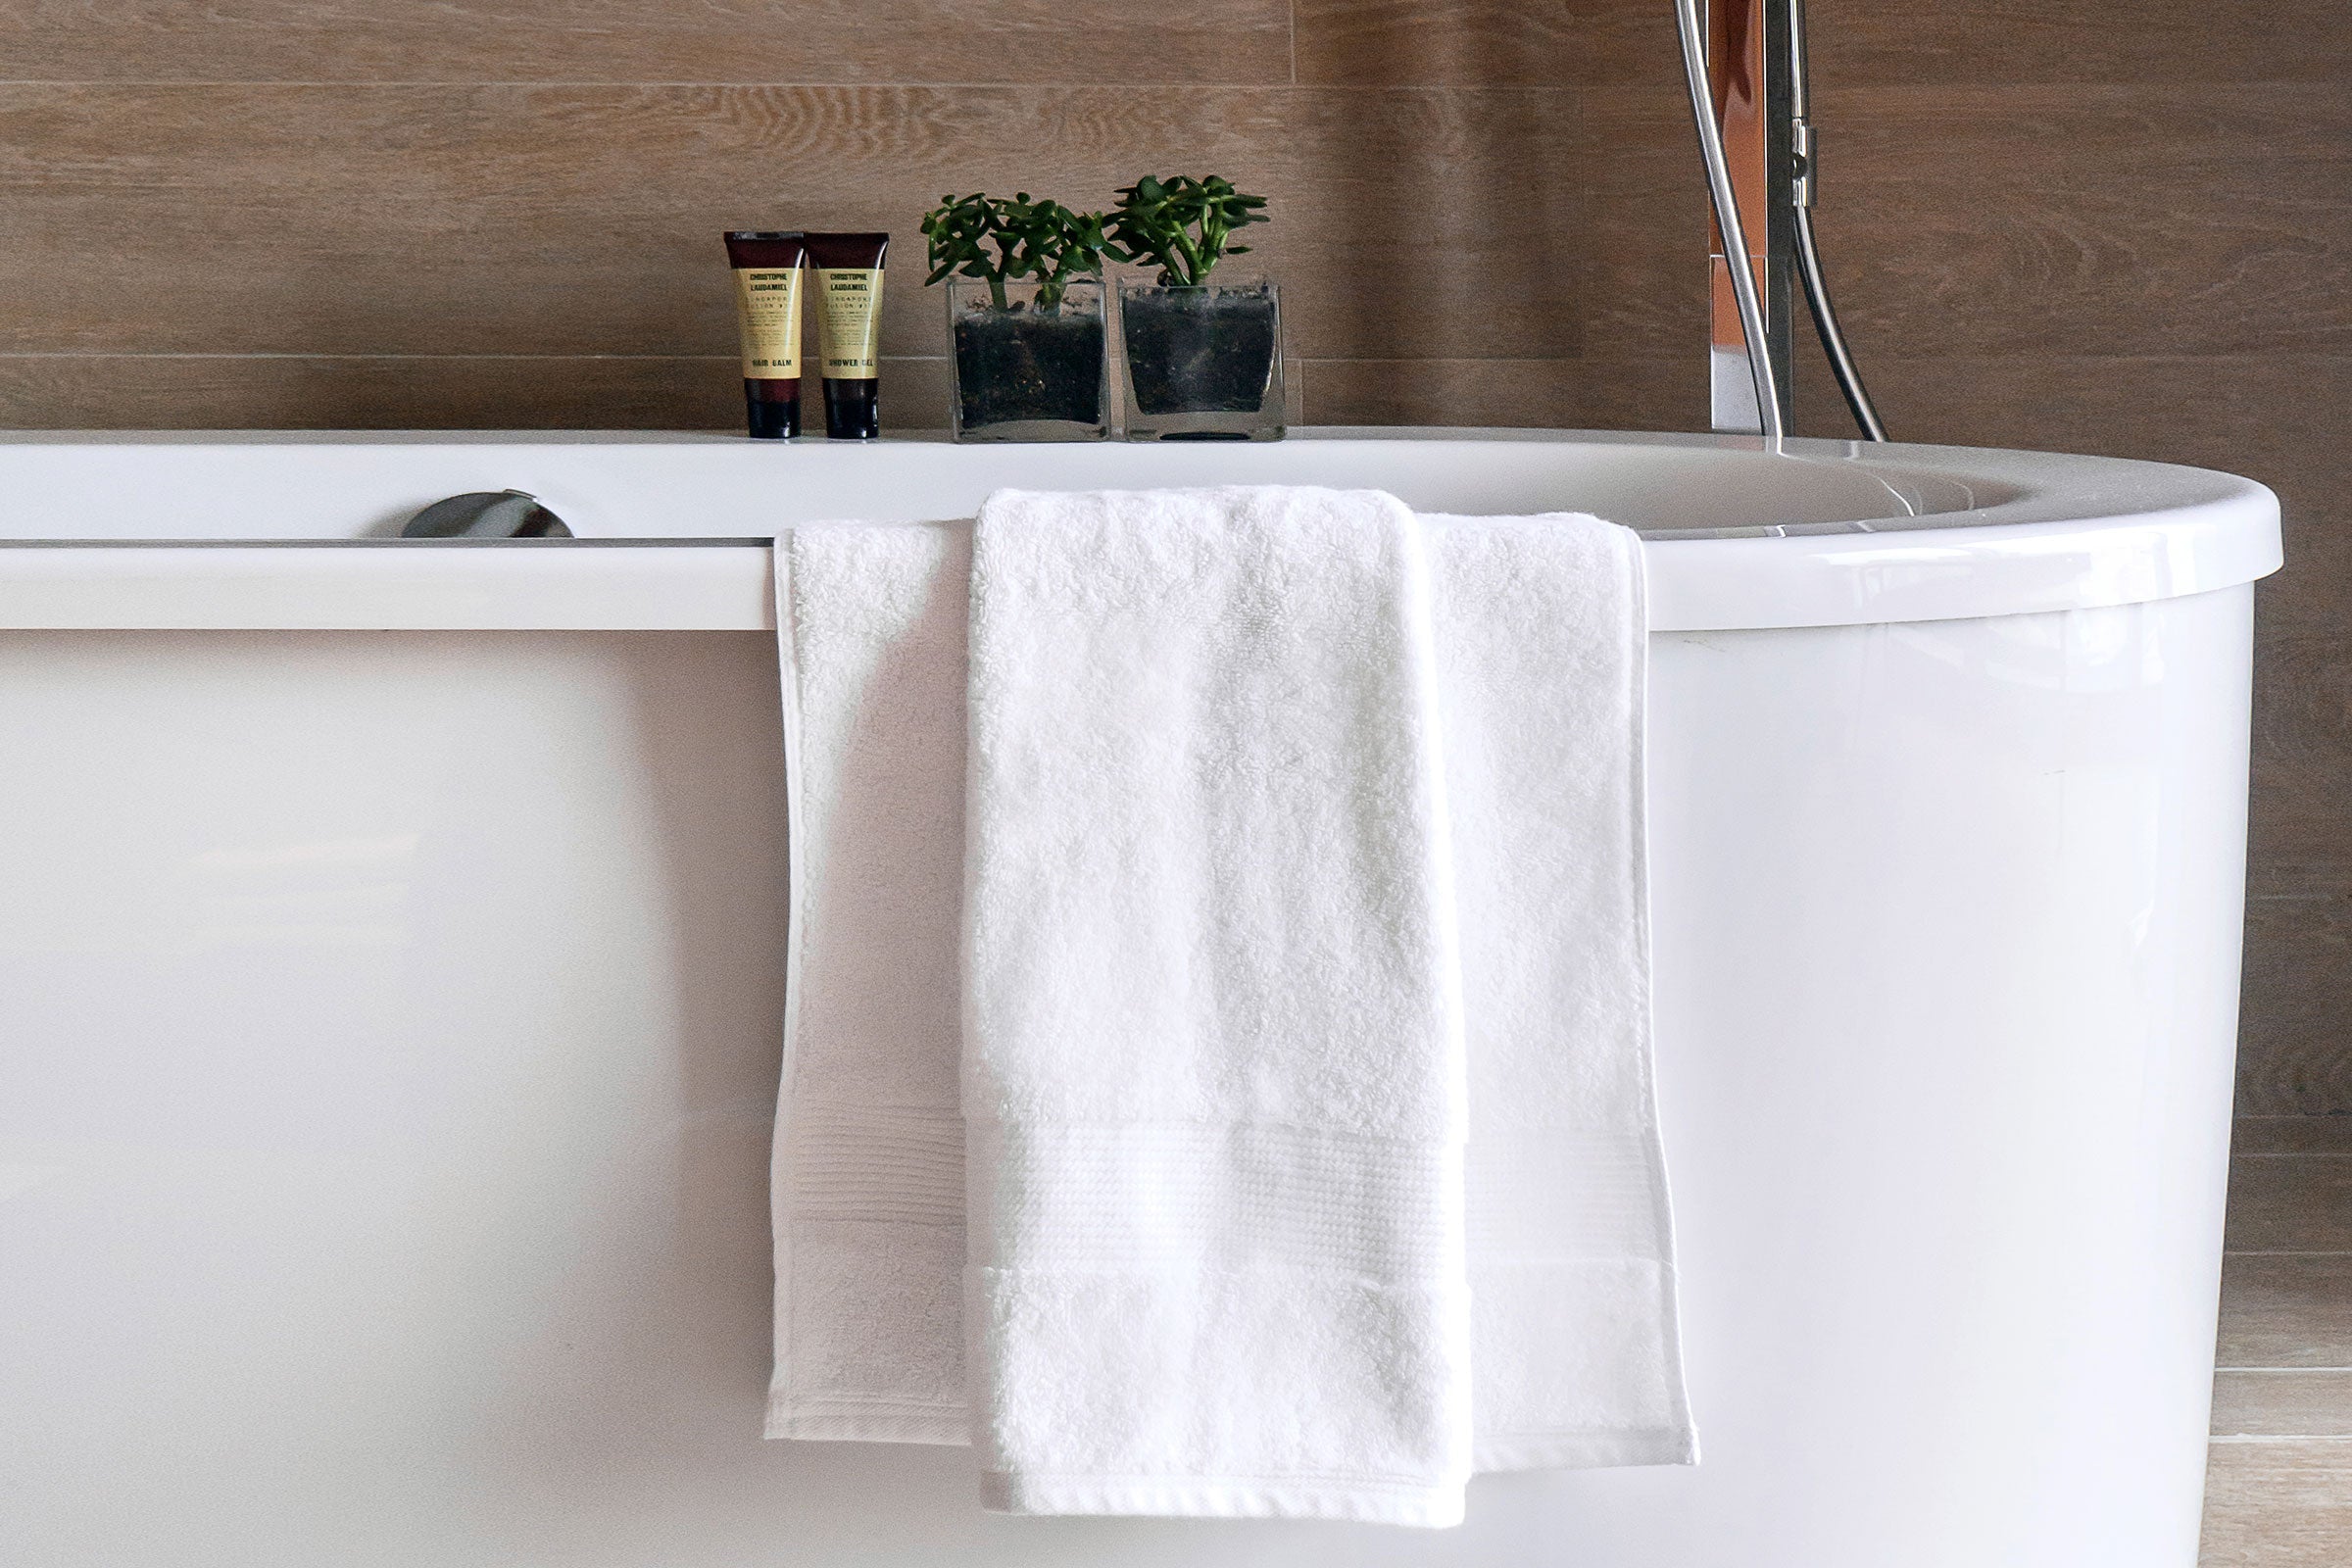 organic-cotton-bath-towel-in-white-colour-hanging-on-a-bathtub-by-sojao